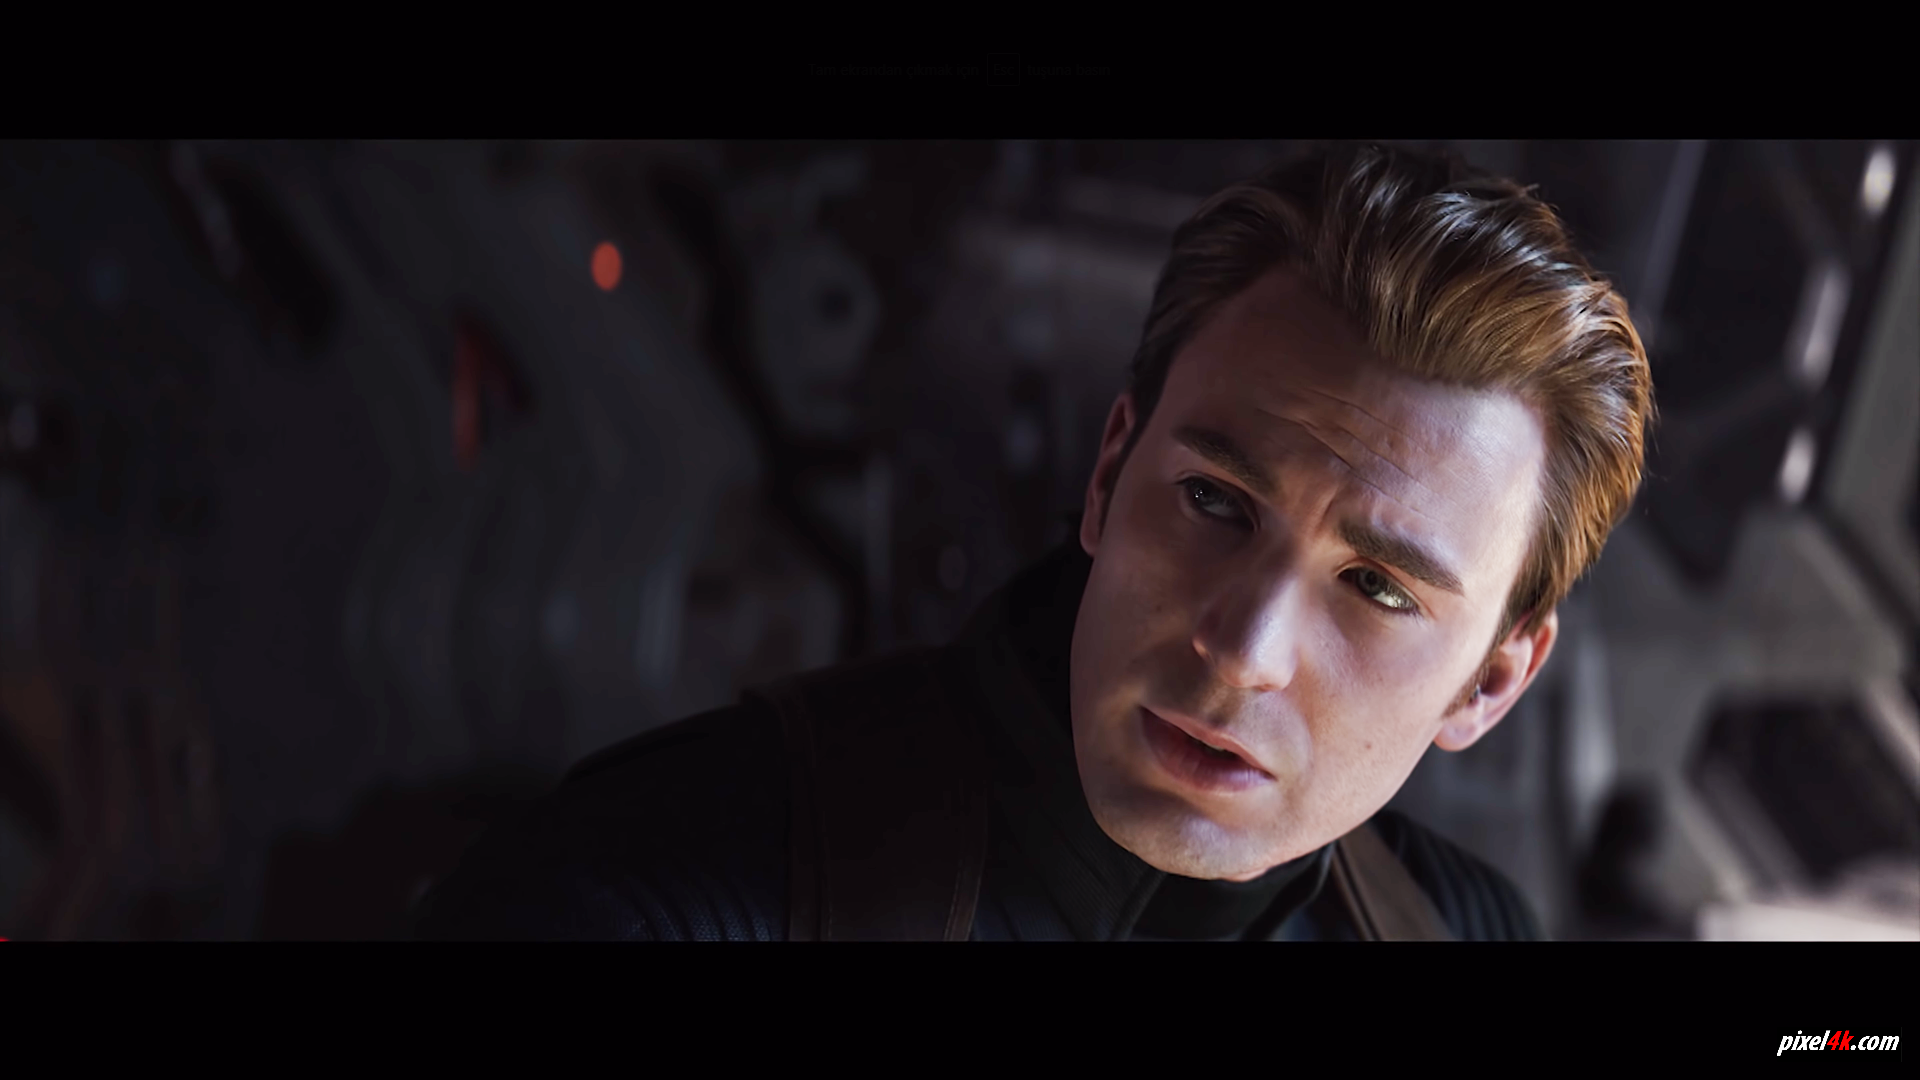 Captain America In The End Game - HD Wallpaper 